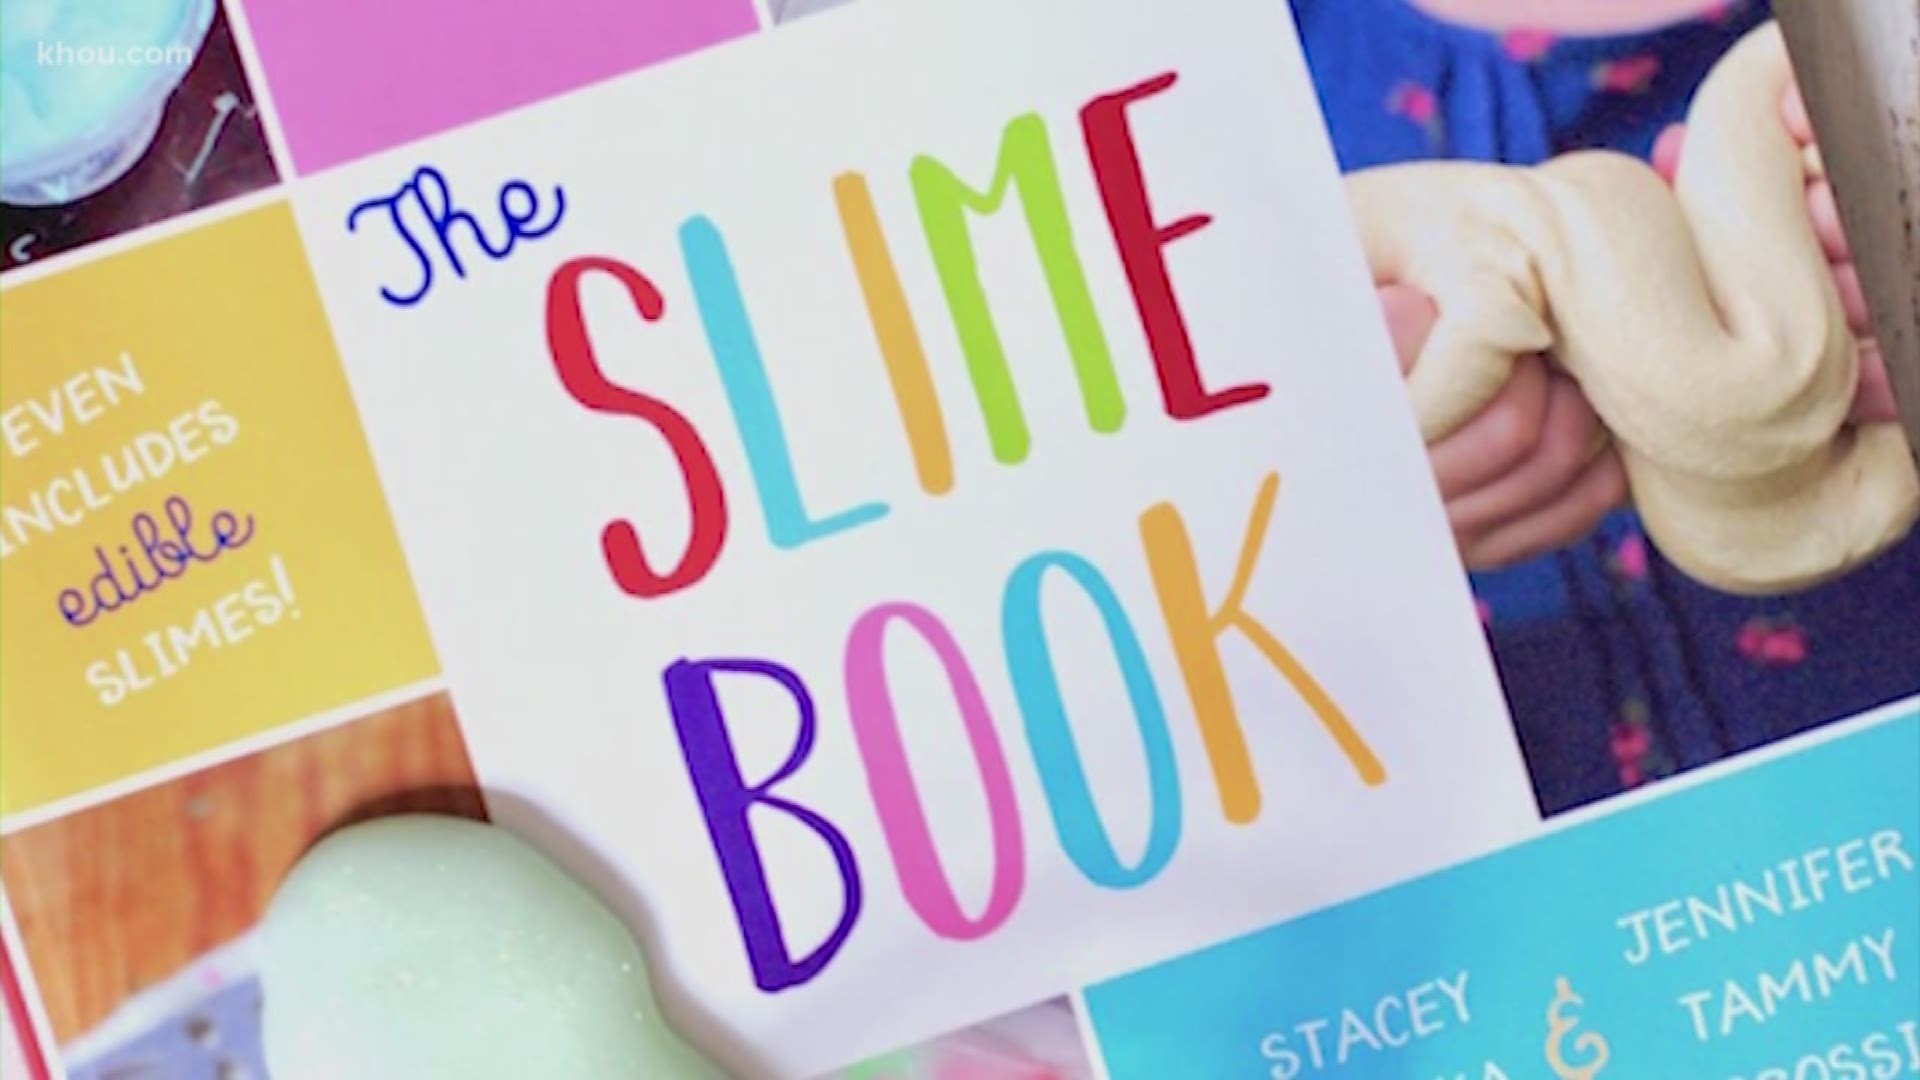 As we count down to Mother's Day on Sunday, we're showcasing H-Town moms all week! Today, we meet a mom blogger who's making playtime fun with homemade slime!